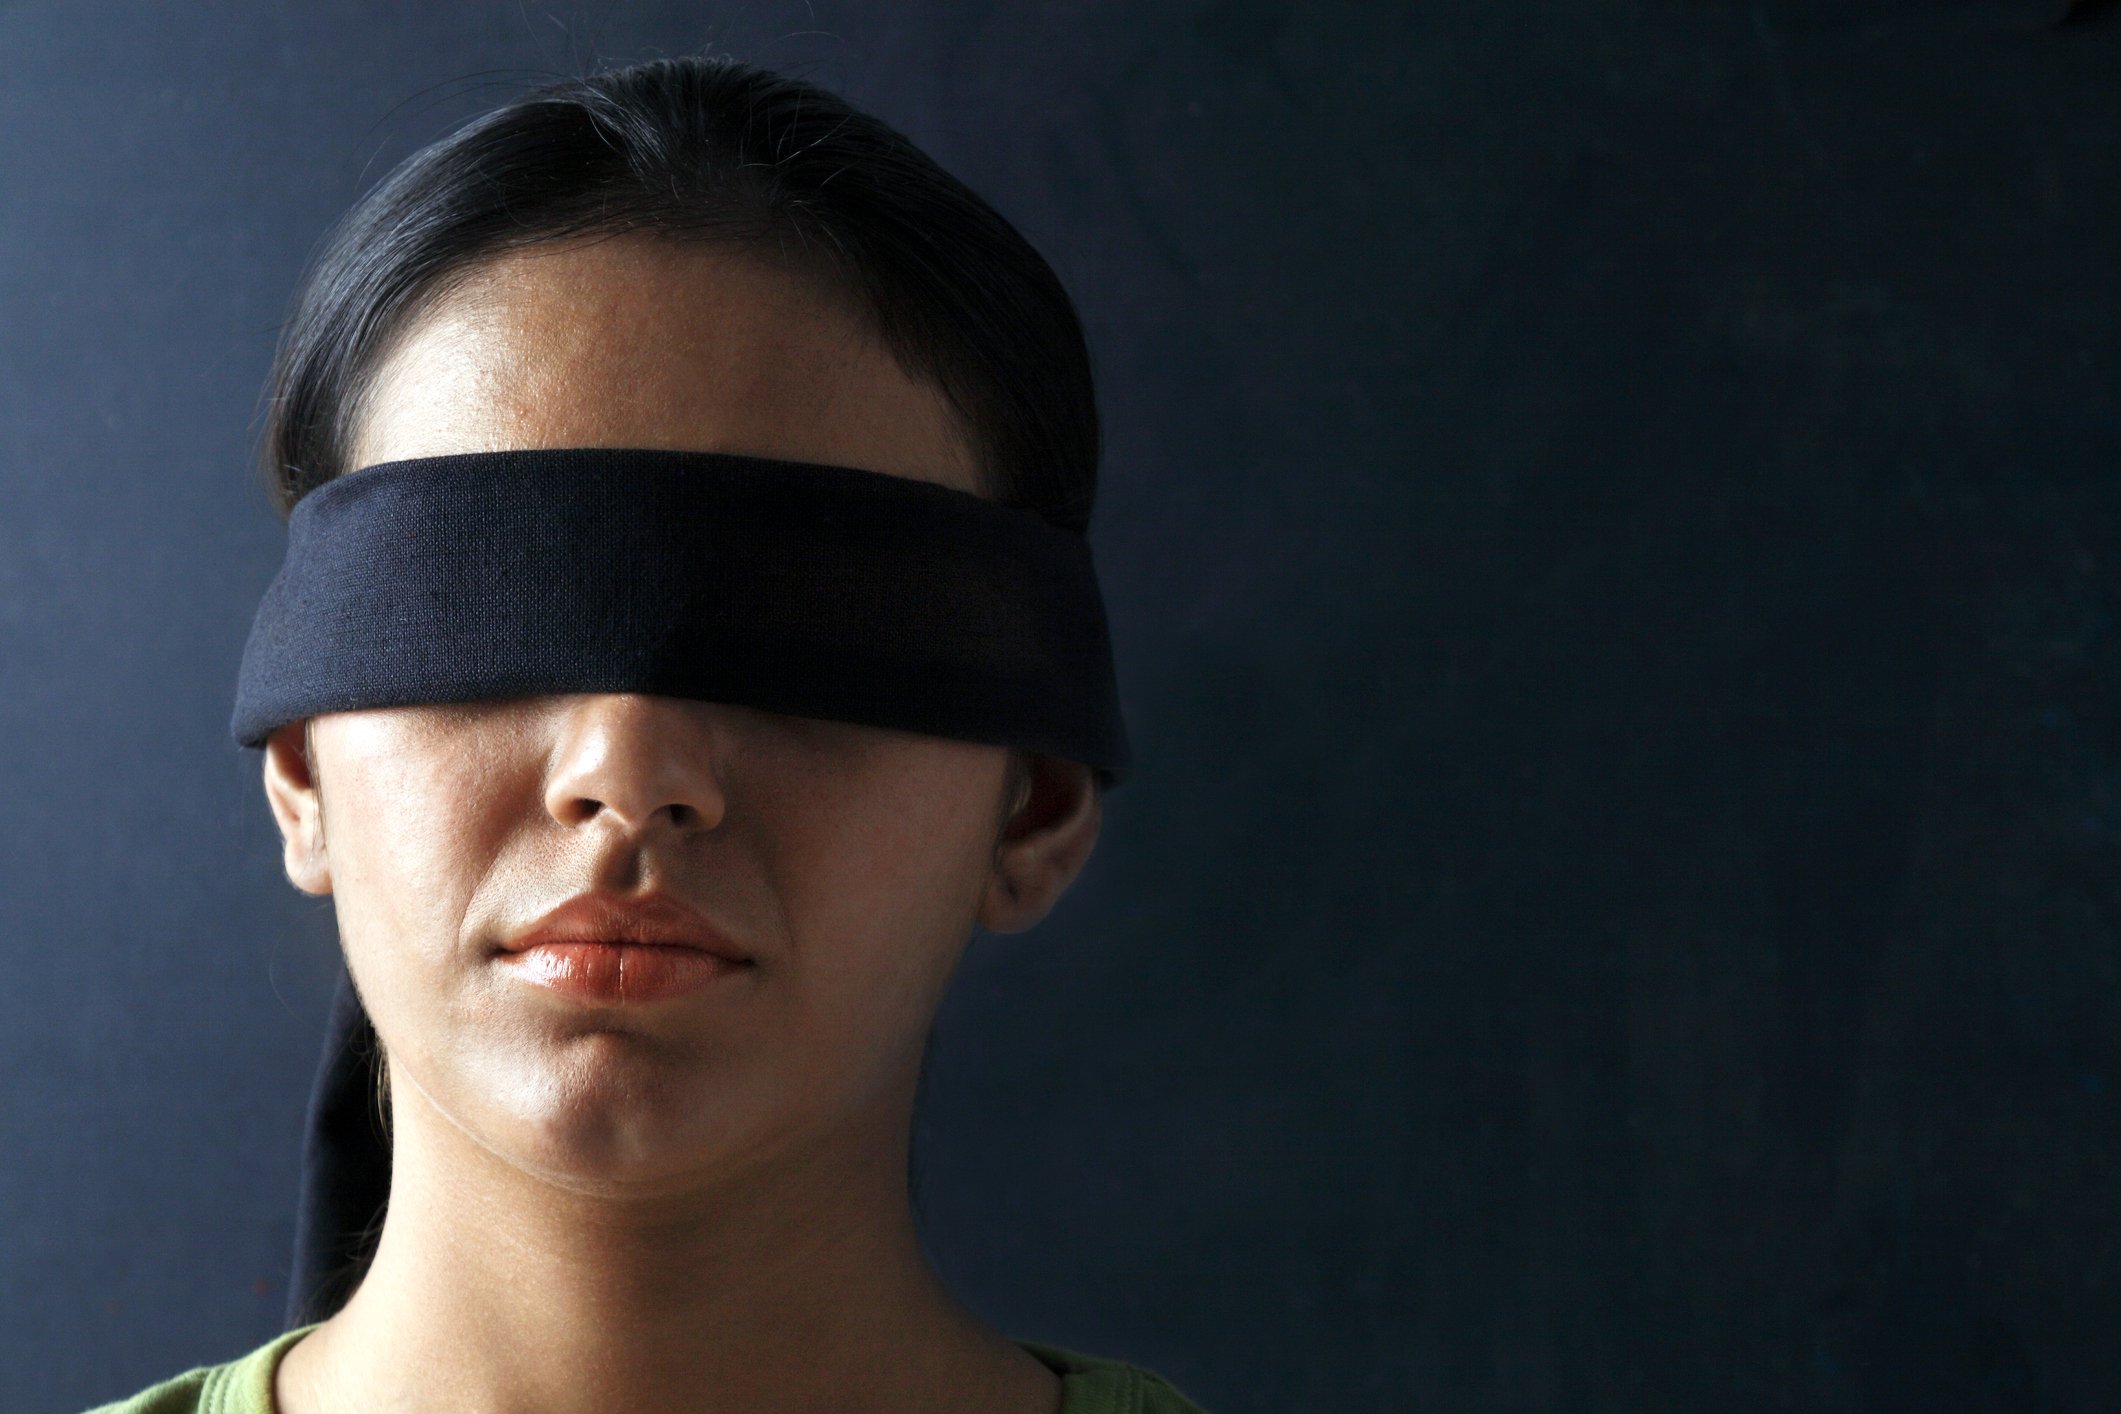 Blindfolding Doesn't Help People Understand What It's Like to be